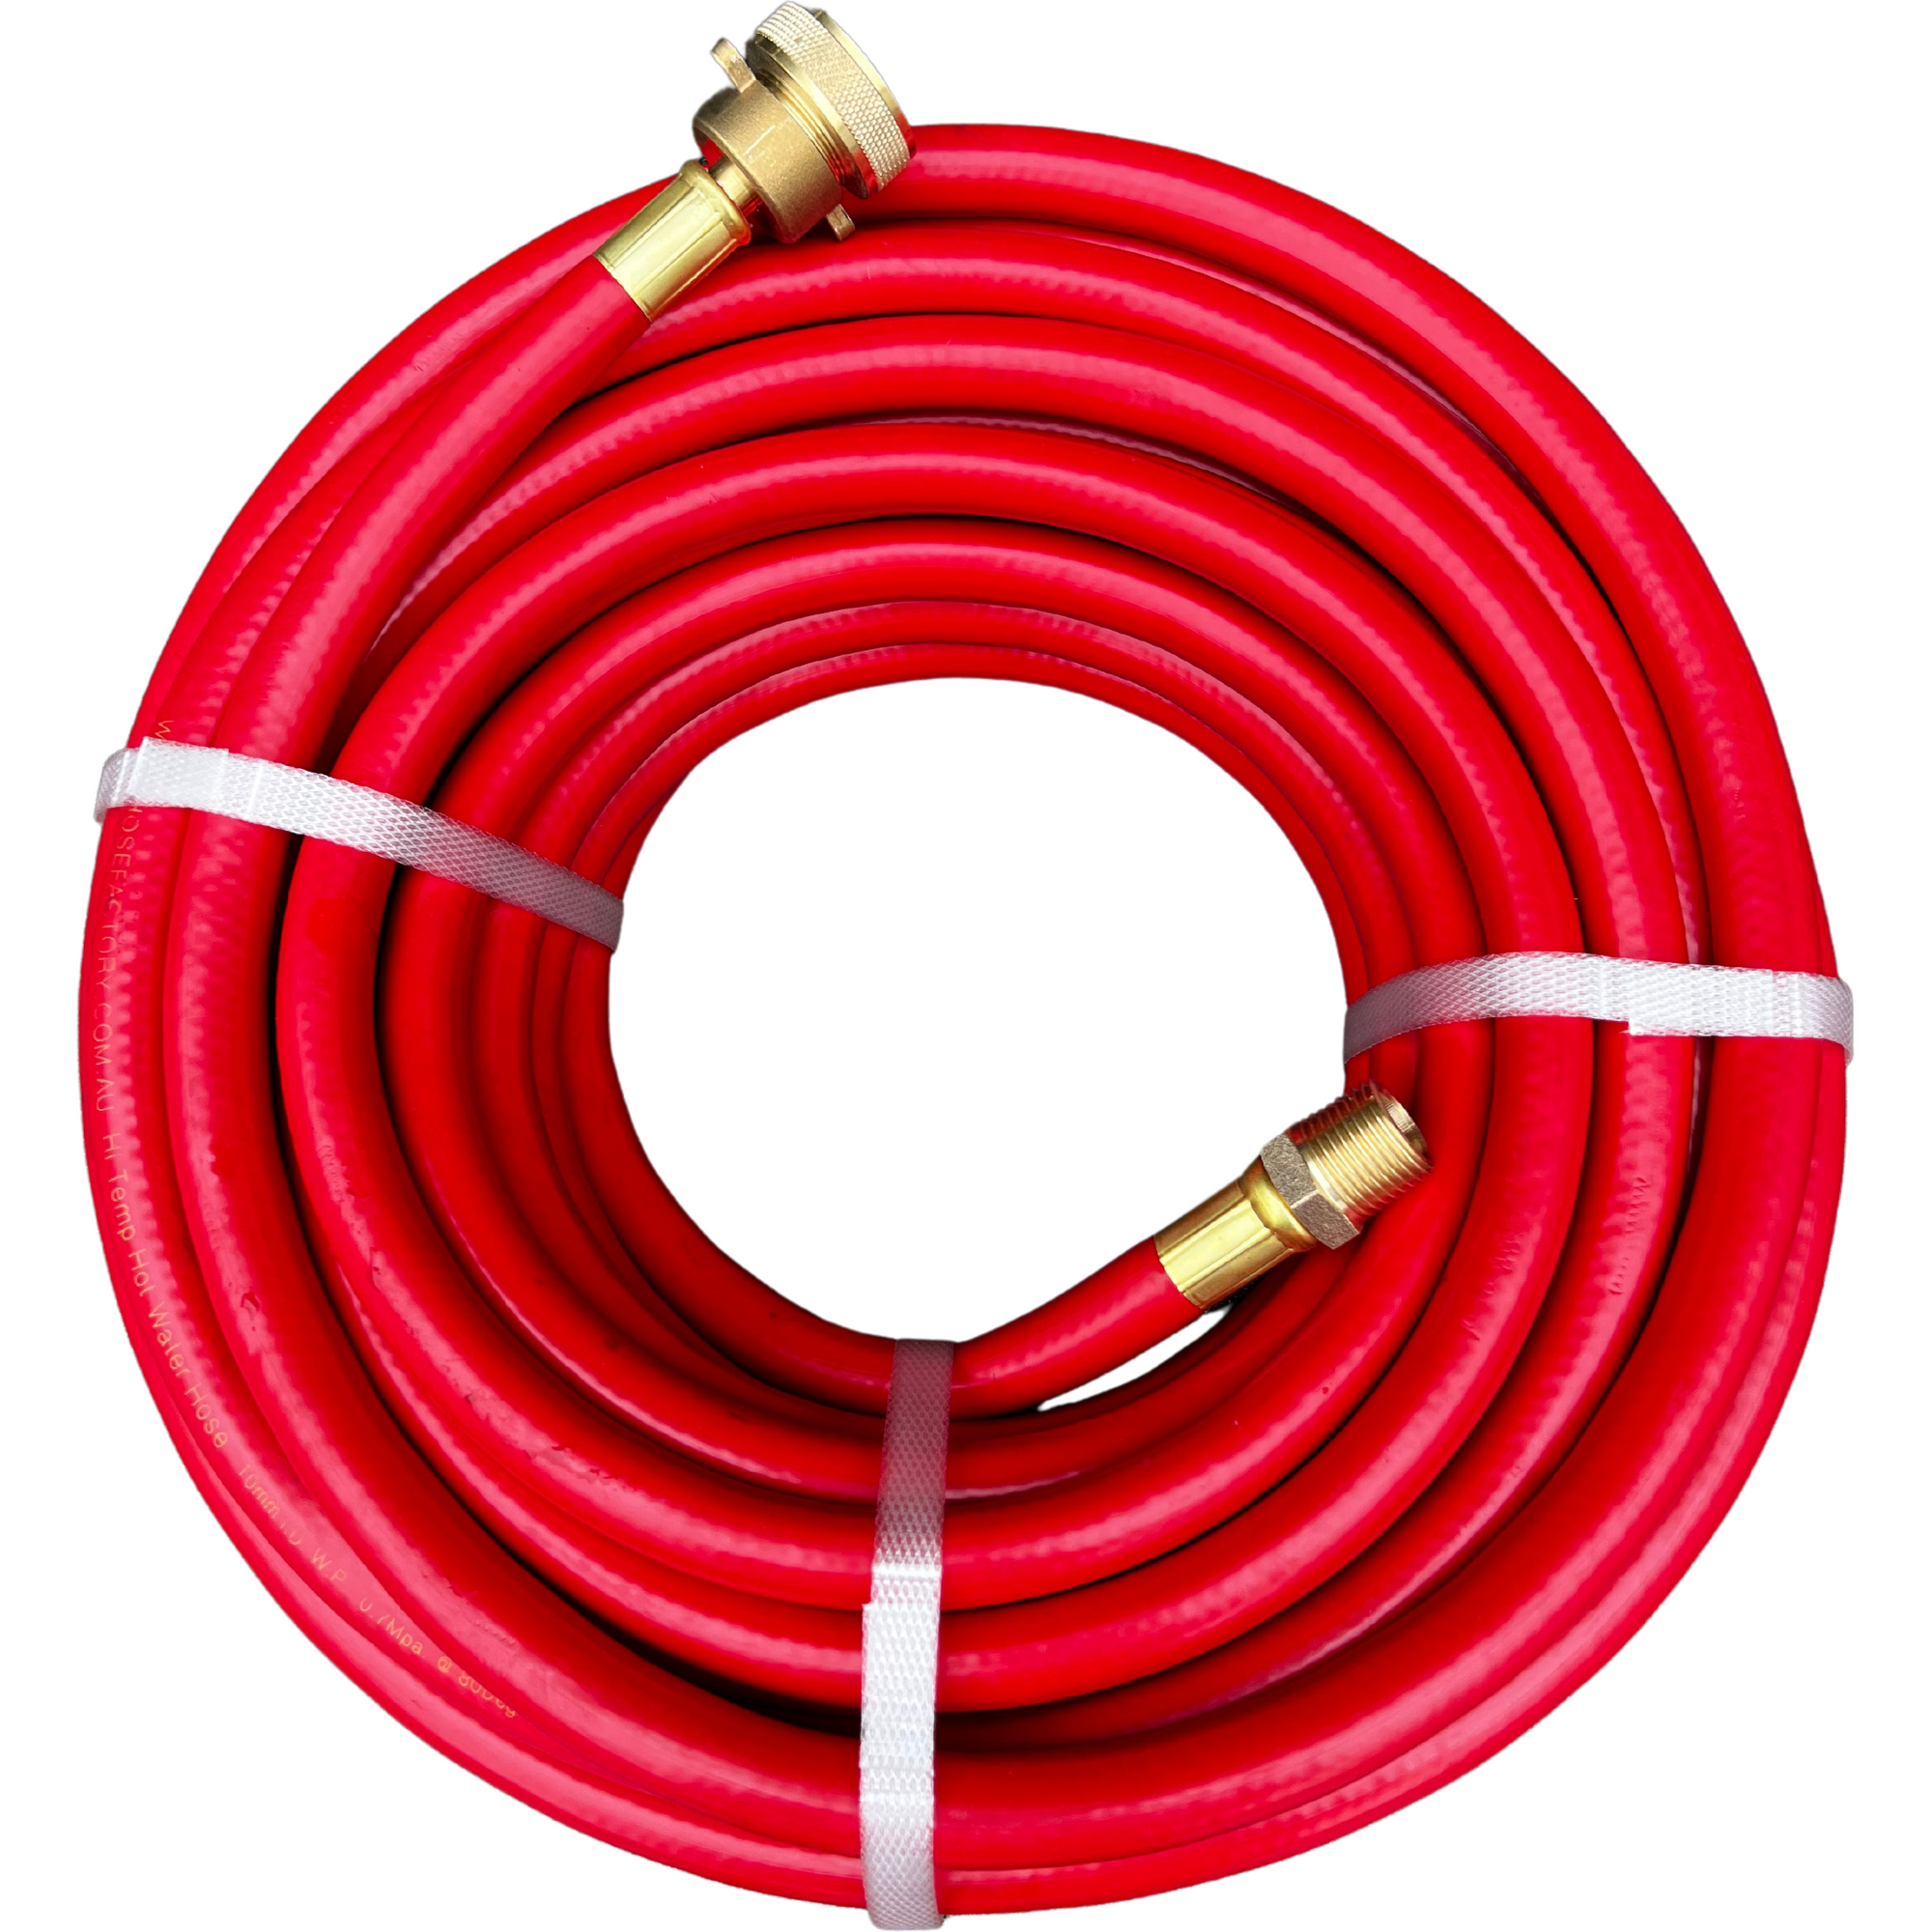 HOSE FACTORY High Temperature Hot Water Hose with Crimped Brass Fittings 10mm